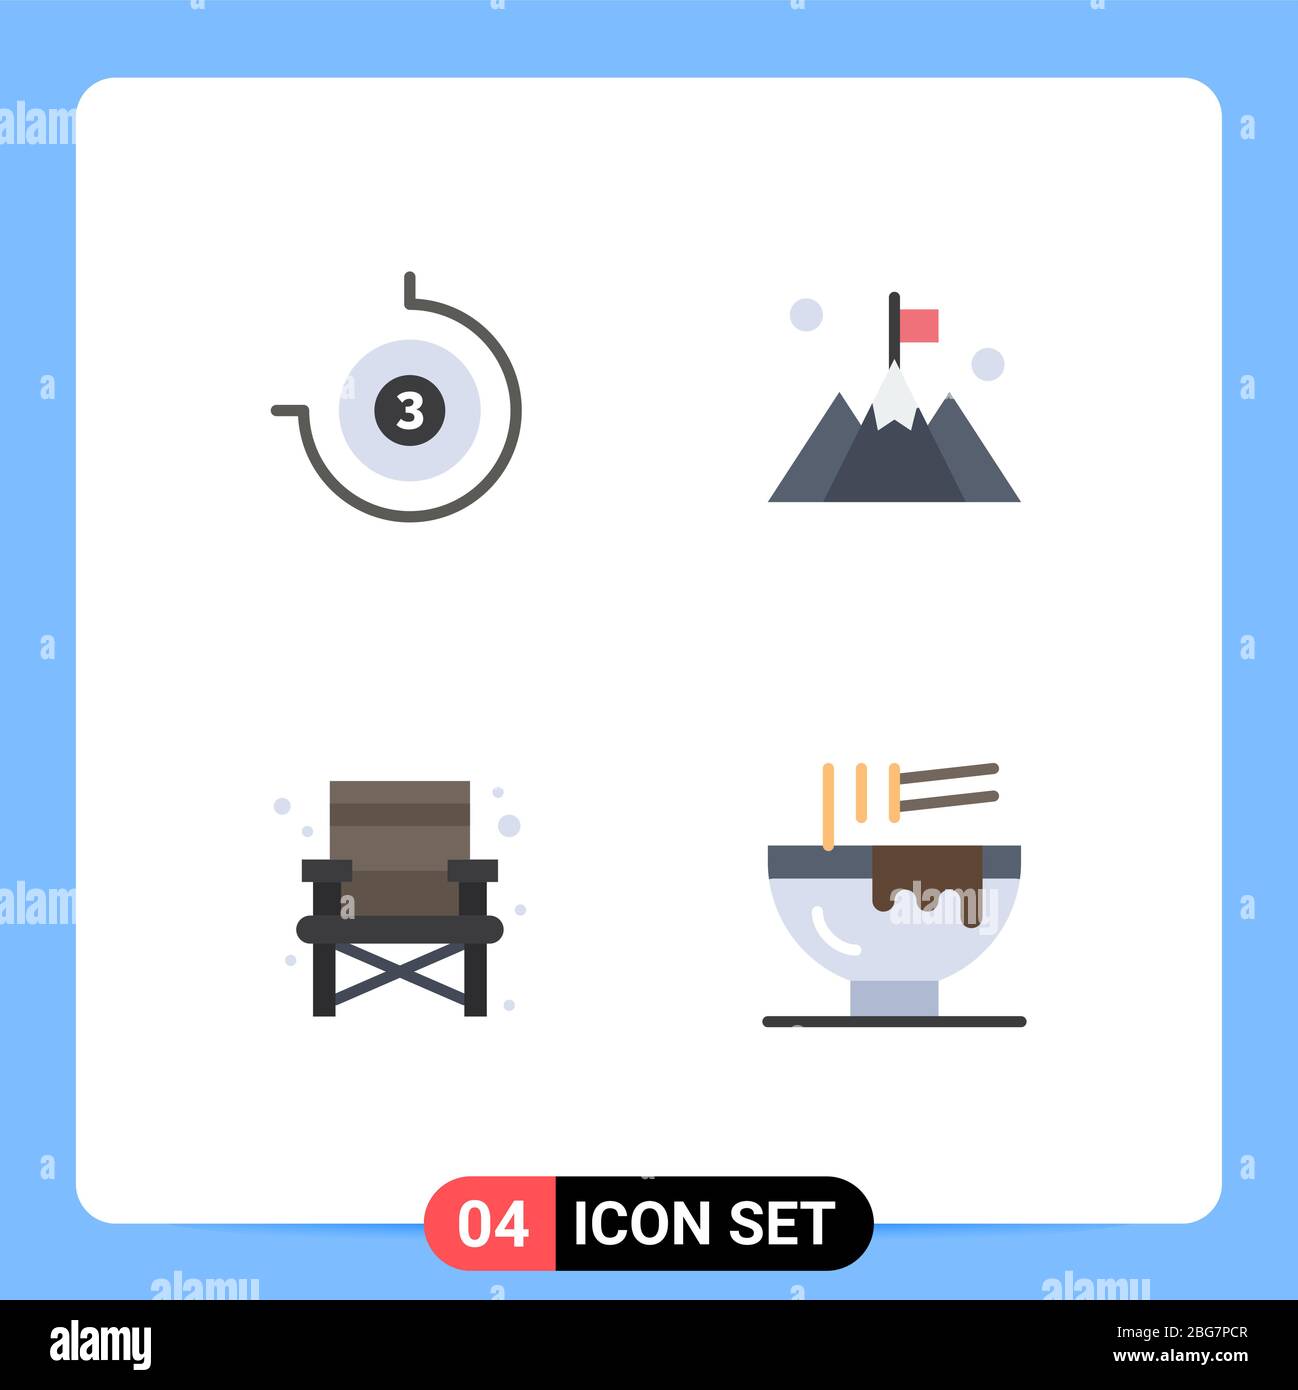 Number Five Icon. 5 Round Circle Digit Letter Count Down Counter